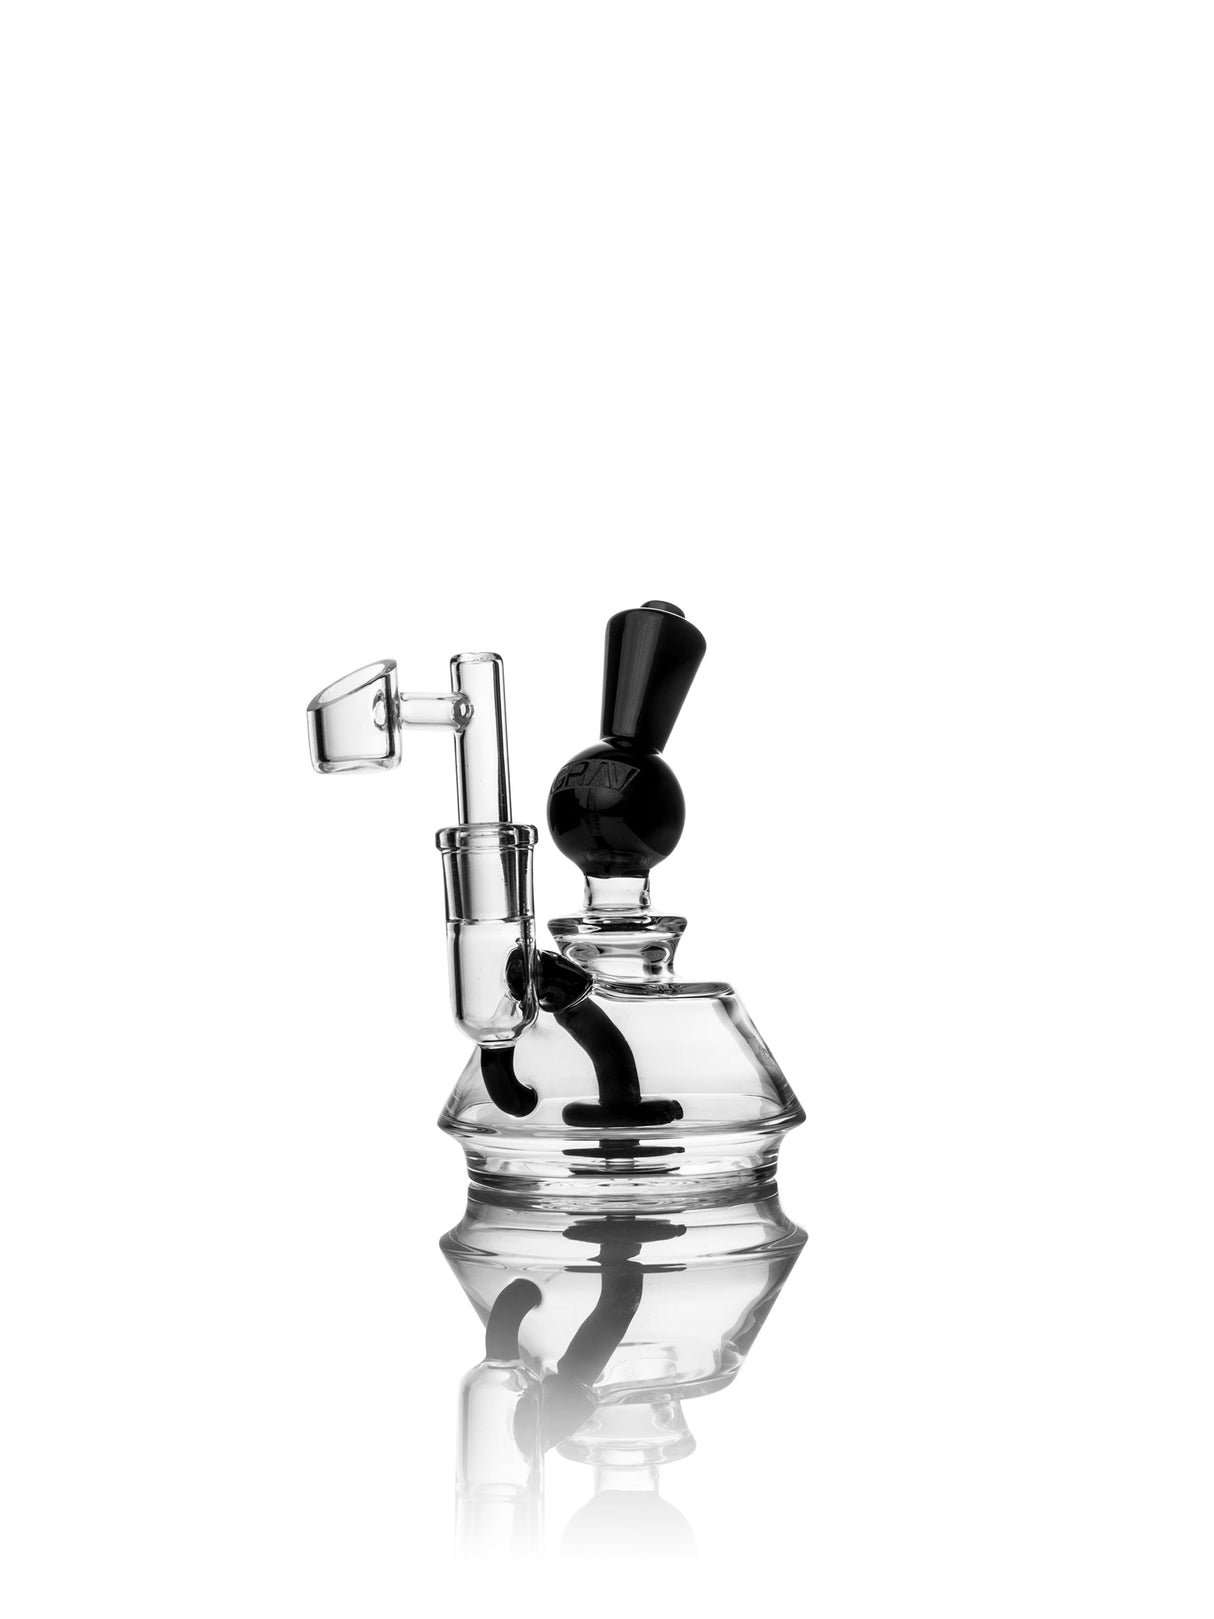 GRAV Orbis Borocca Water Pipe - Compact Beaker Design for Concentrates, Black Accents, 5.5" Tall